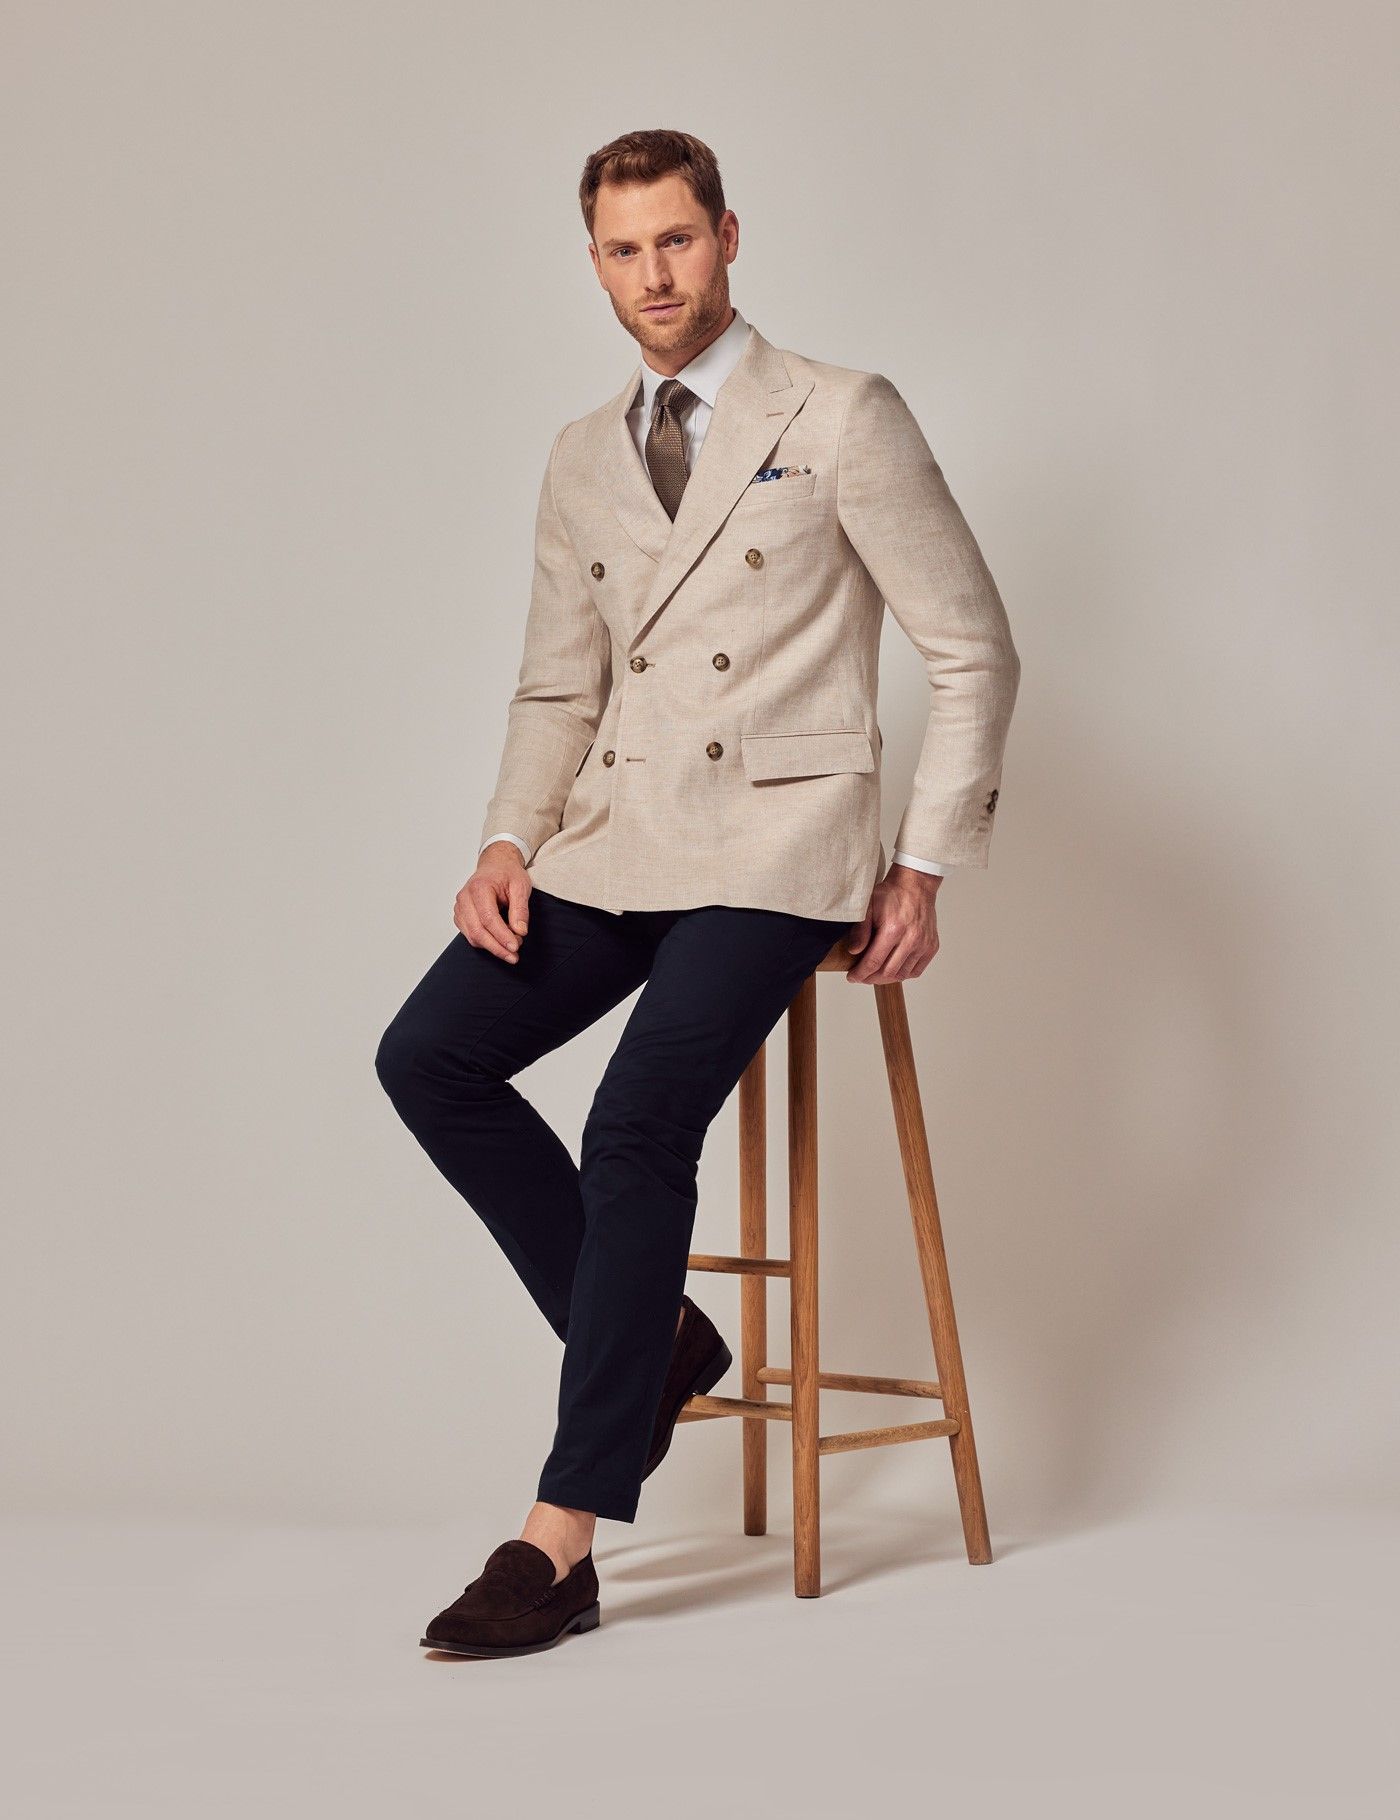 Hawes & Curtis Cream Double Breasted Linen Tailored Suit Jacket